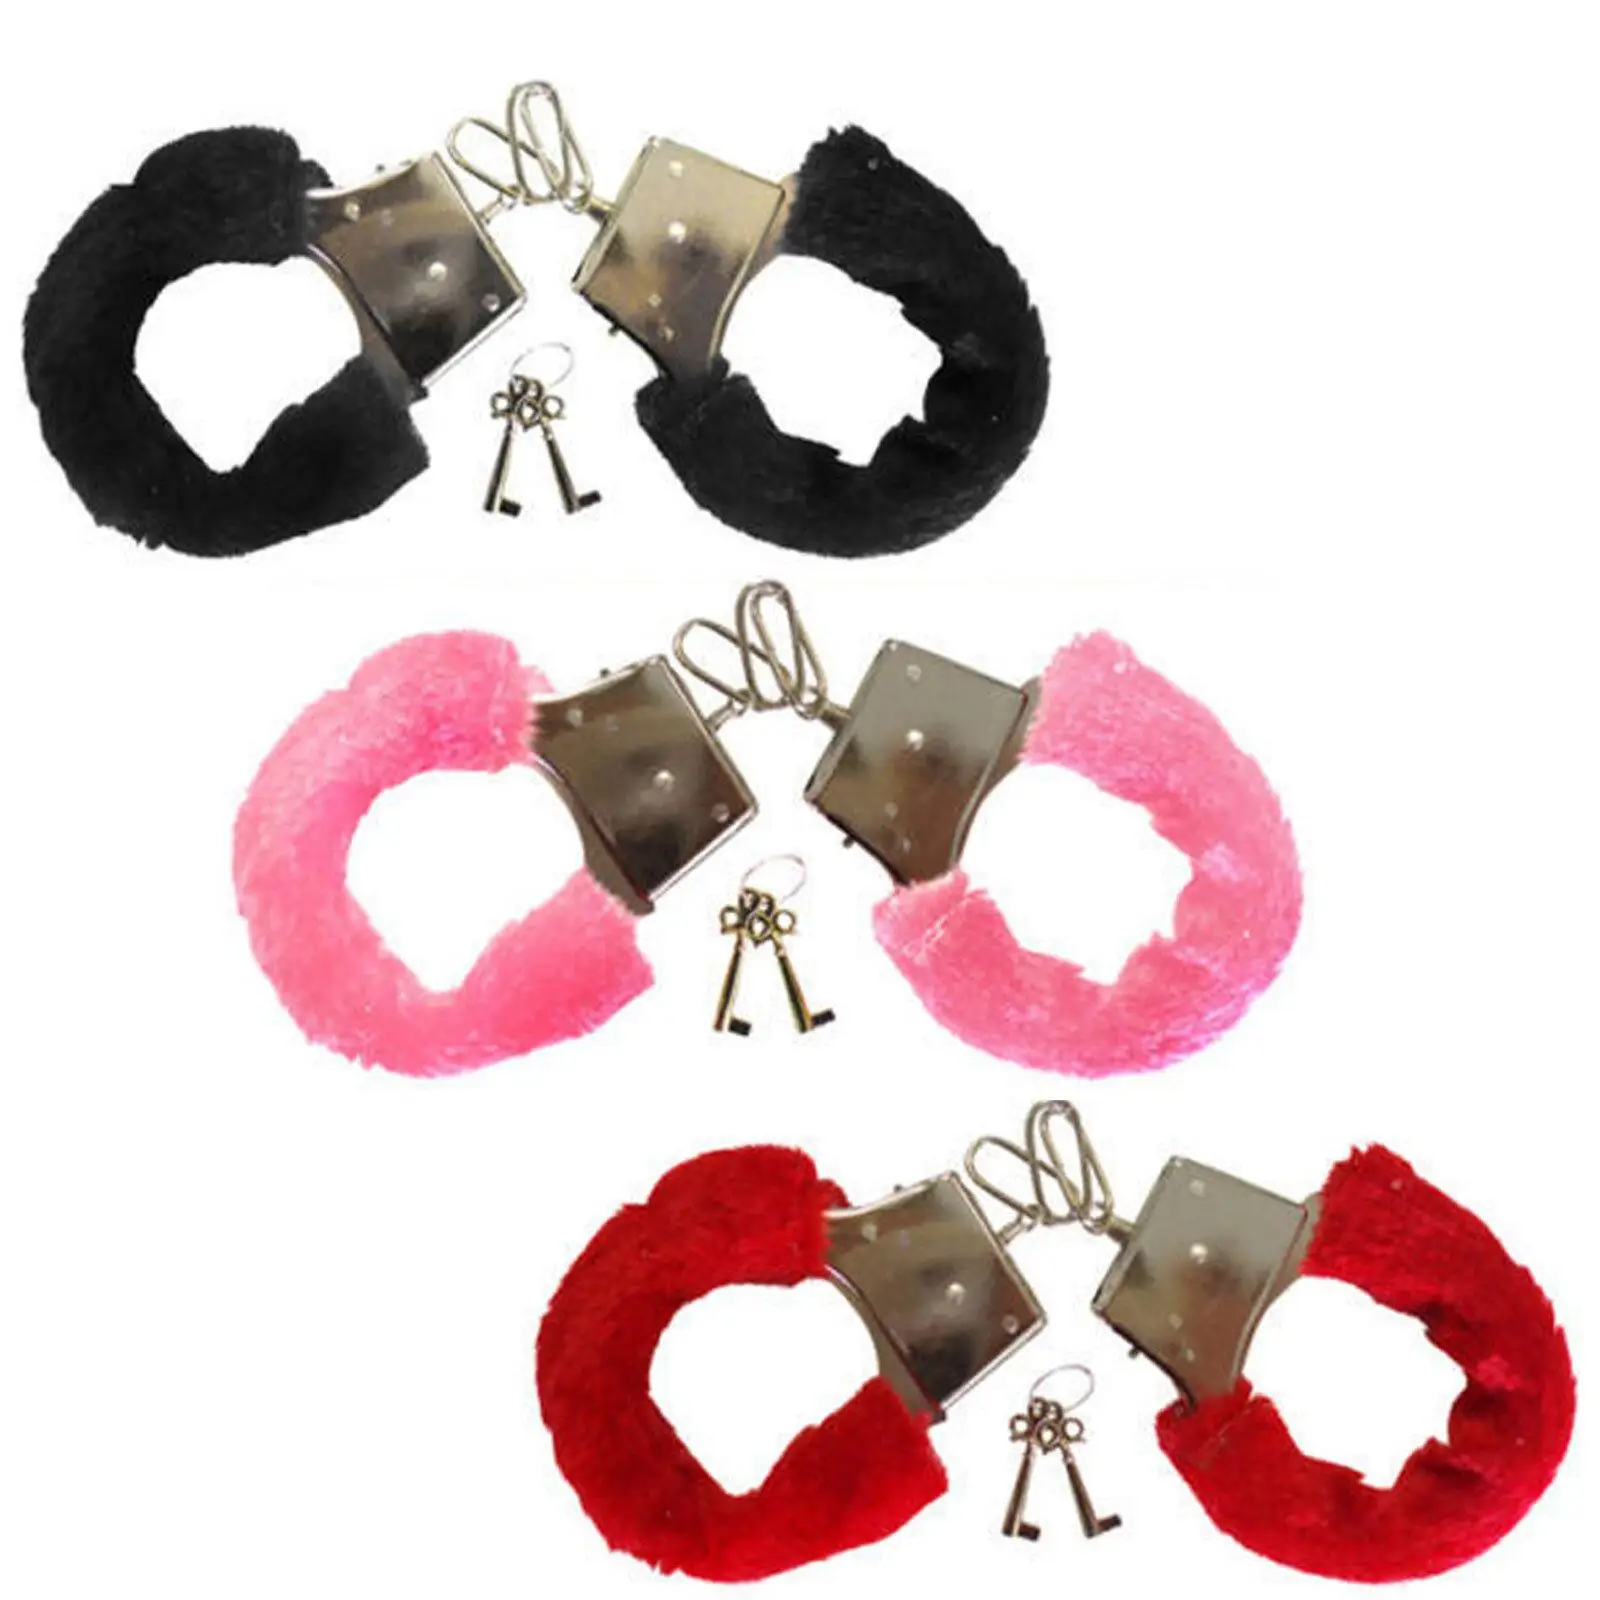 Adult Furry Fluffy Handcuffs With Keys Hen Stag Do Party Play Toy Sexy Toys Accessory Cn008